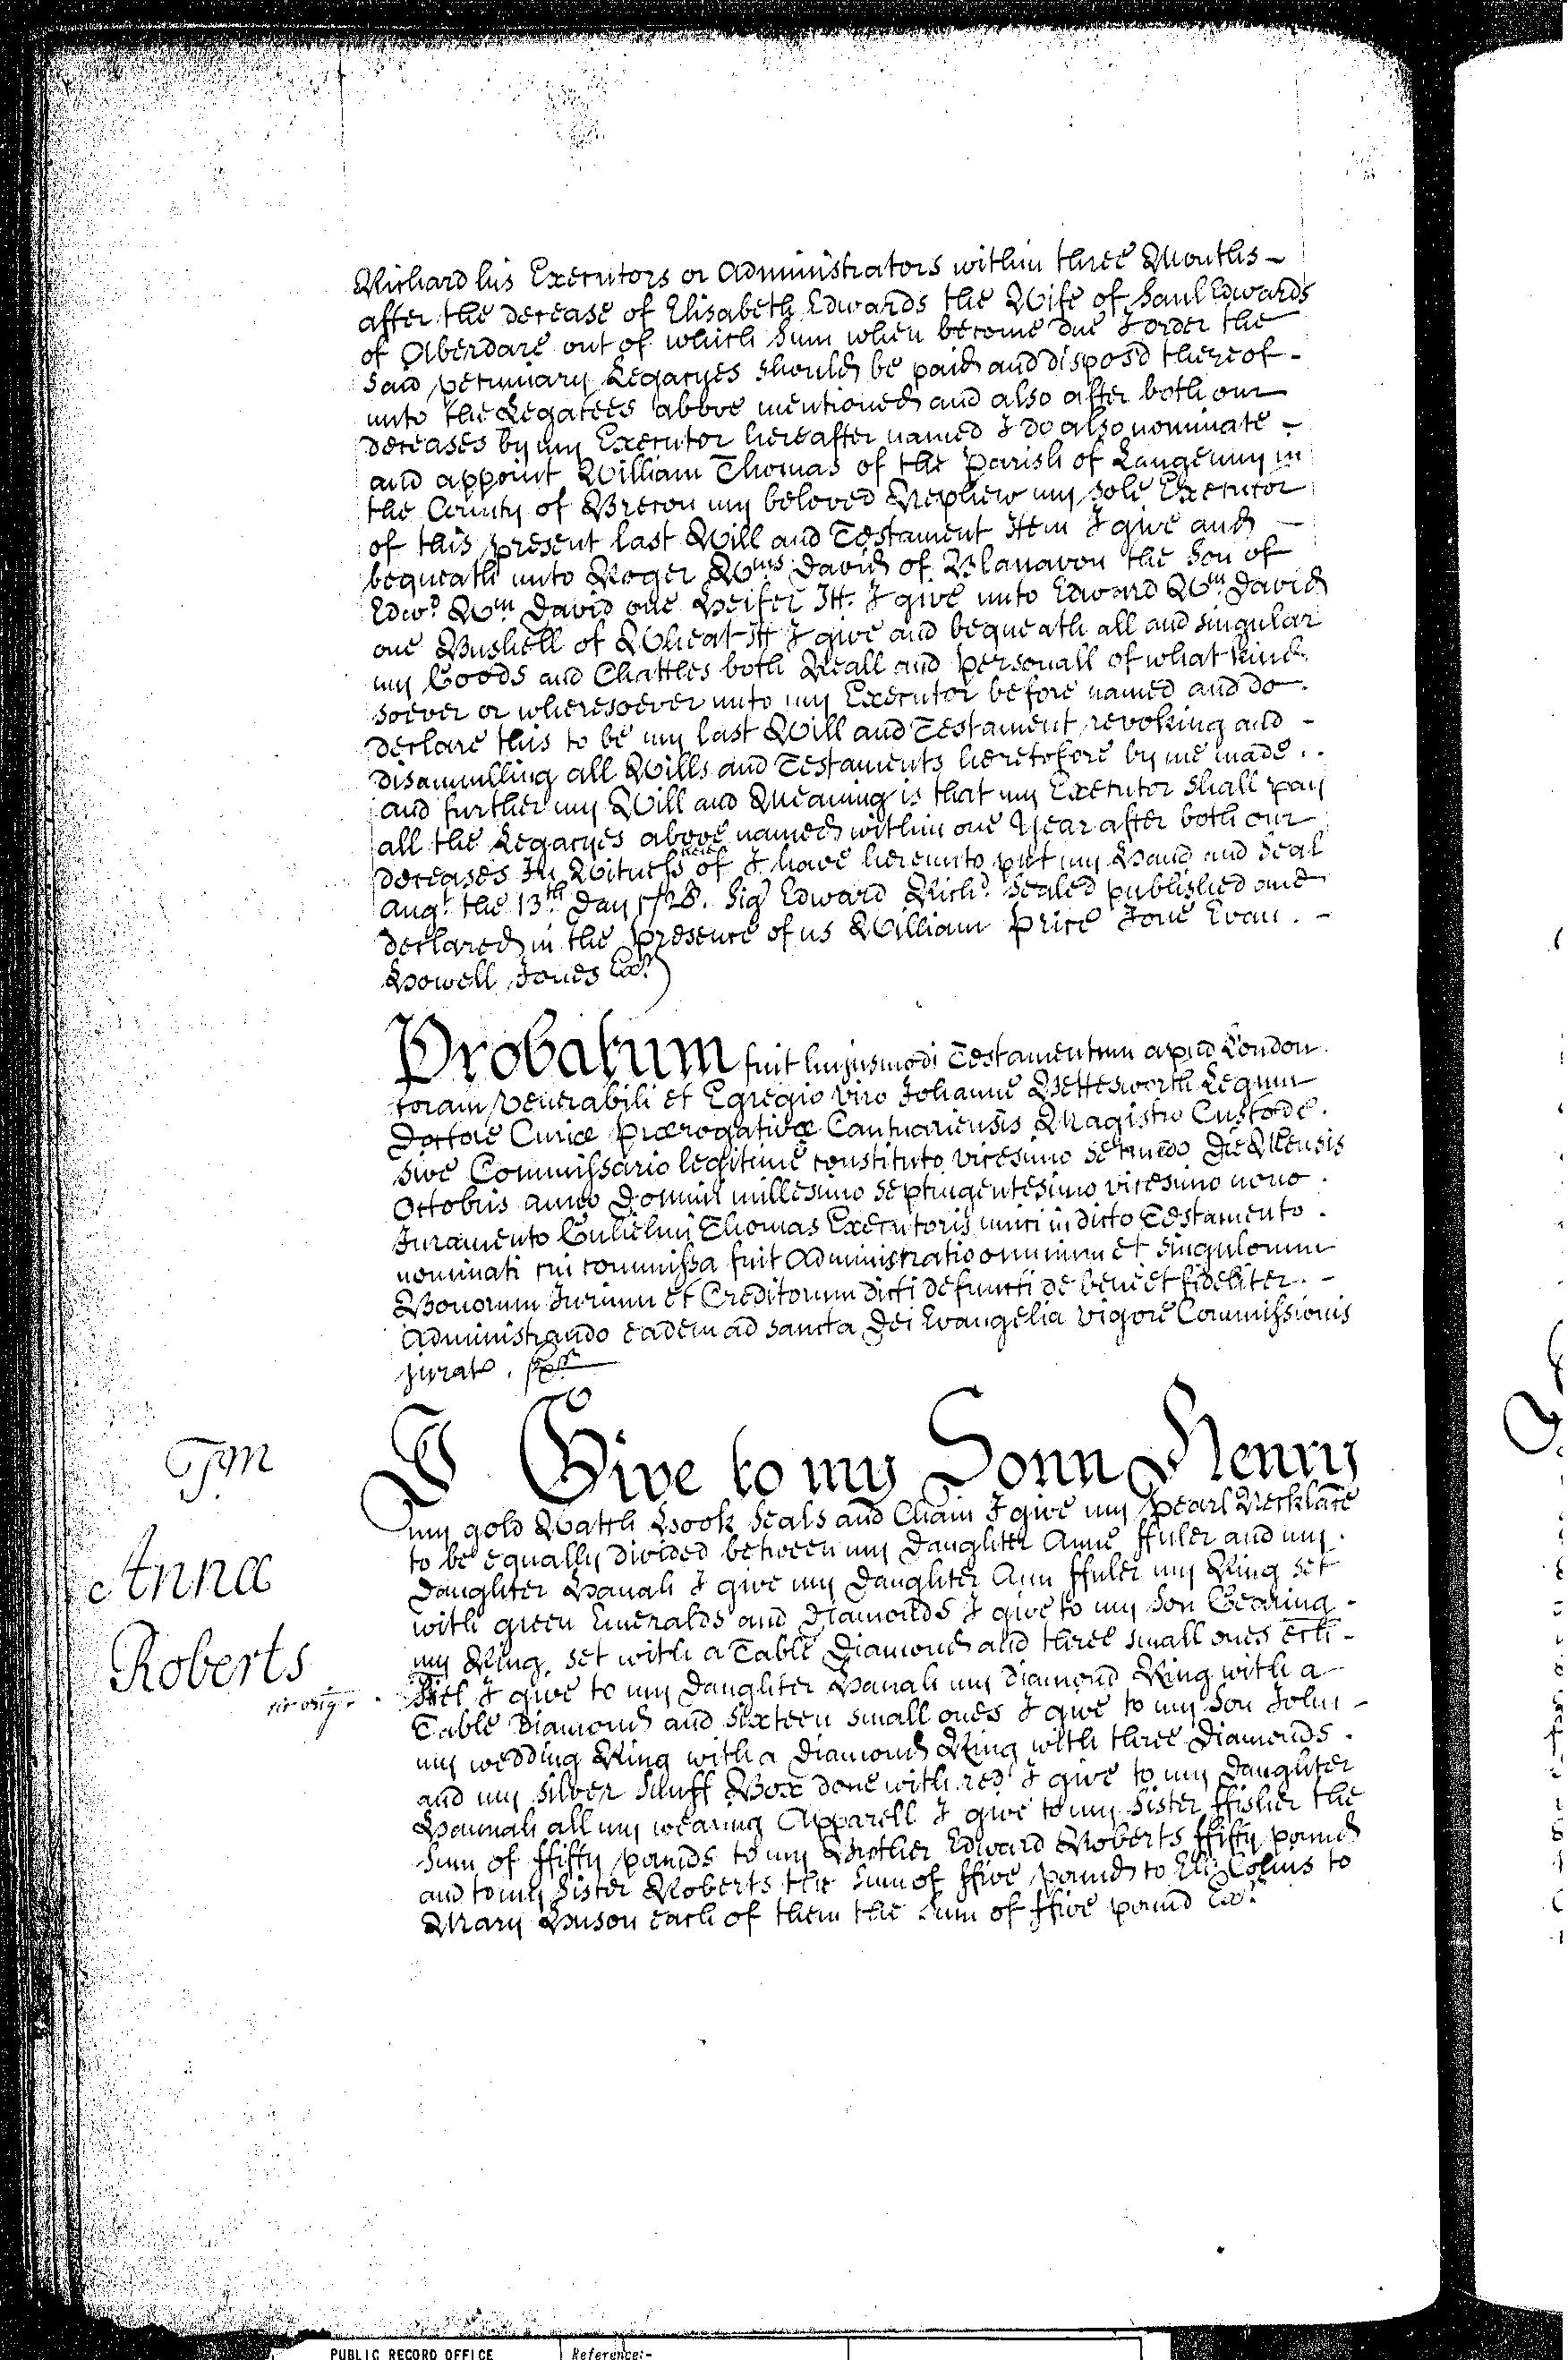 The 1729 will of Ann Roberts, leaving her gold watch to Sonn Henry. Page 1